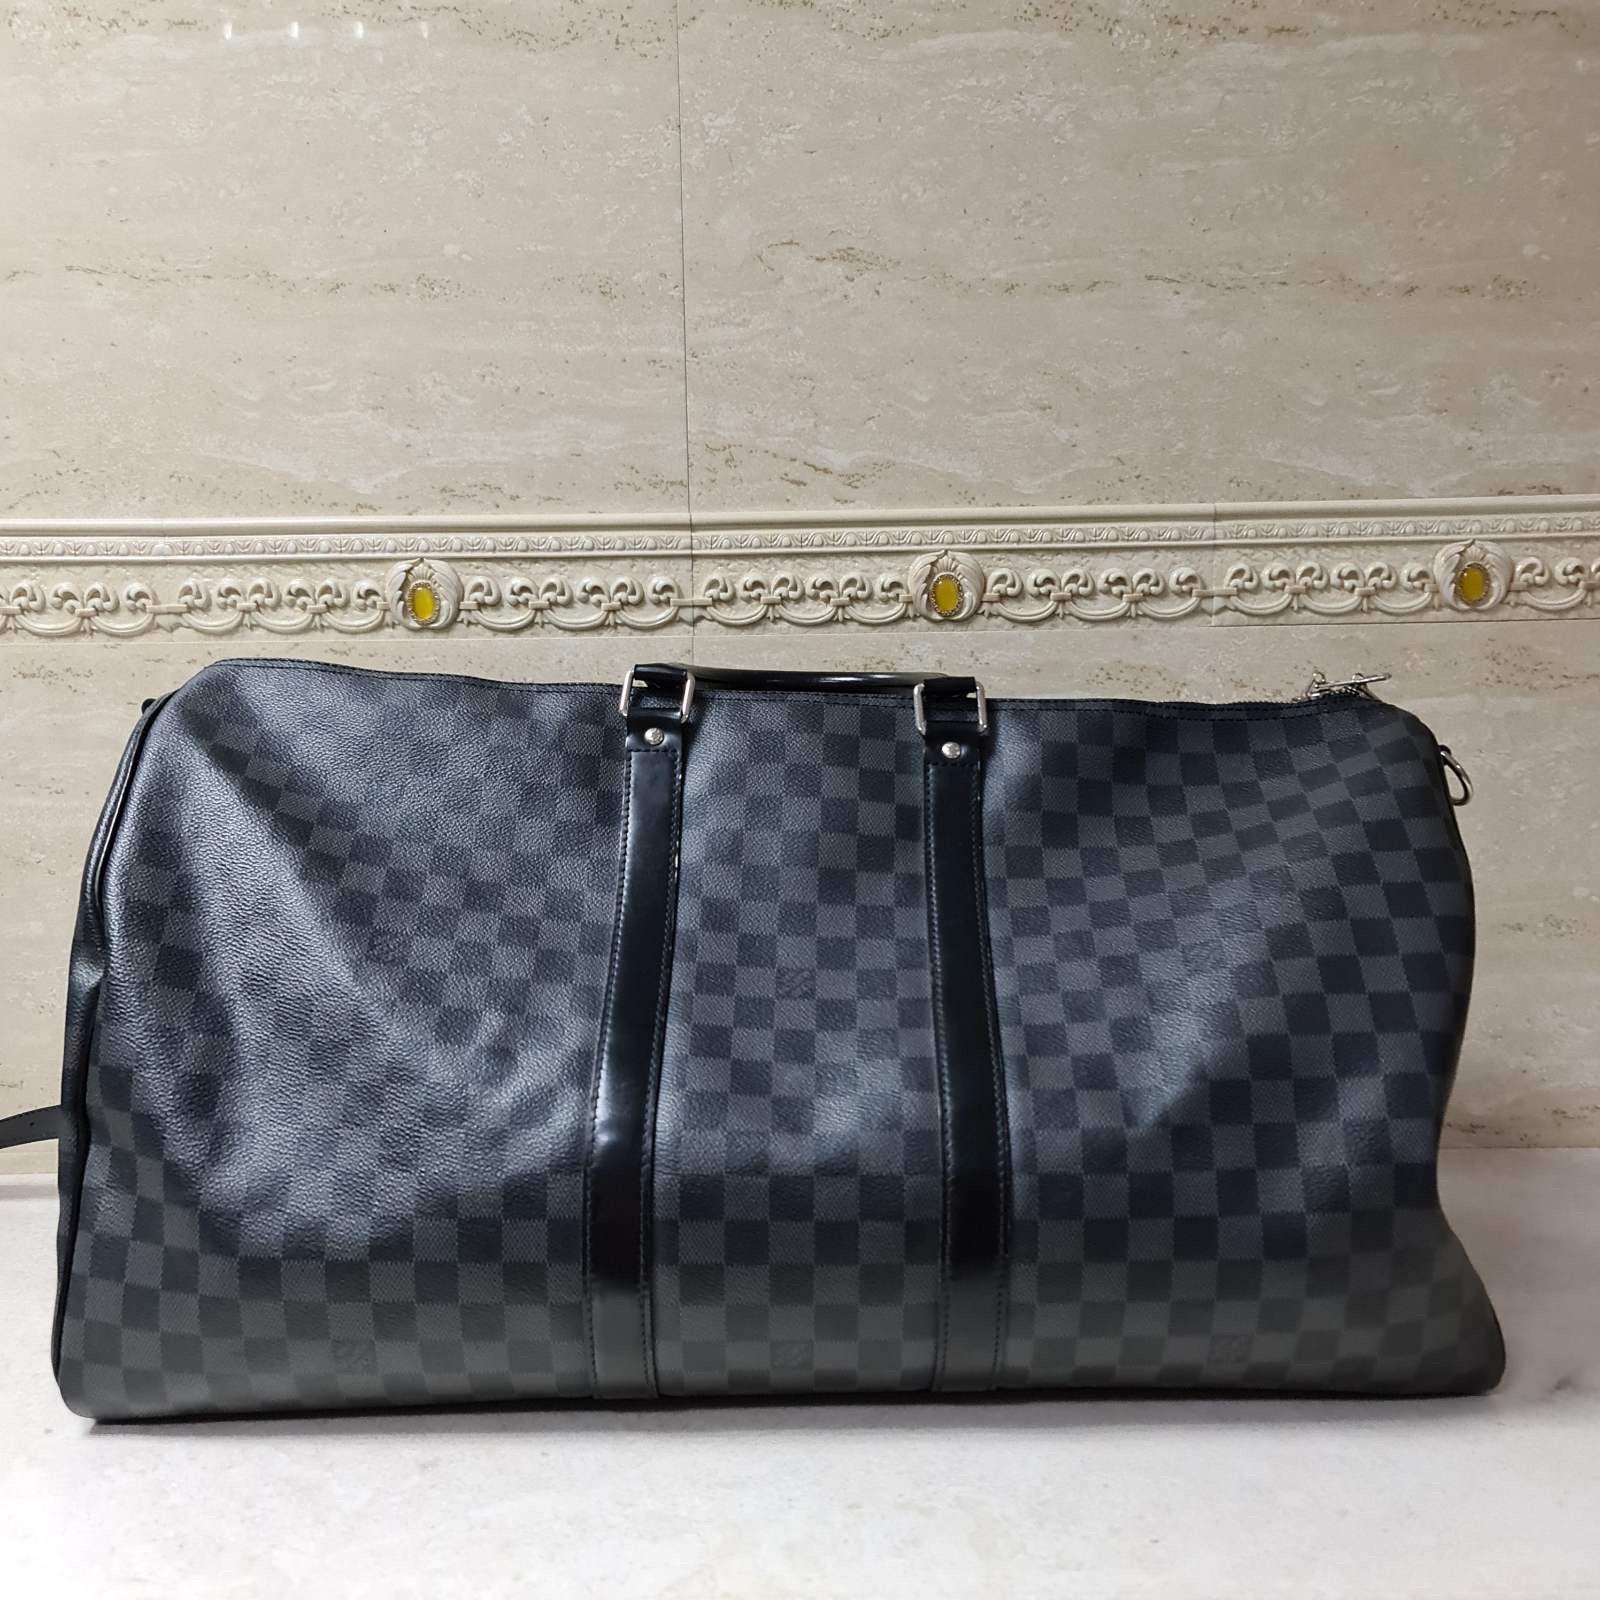 This Louis Vuitton Damier Graphite Canvas Keepall Bandouliere 55 Bag is perfect for travel or weekend getaway. With its ultra-spacious interior and the capability of folding flat, this bag is versatile as an additional travel piece. The Bandouliere